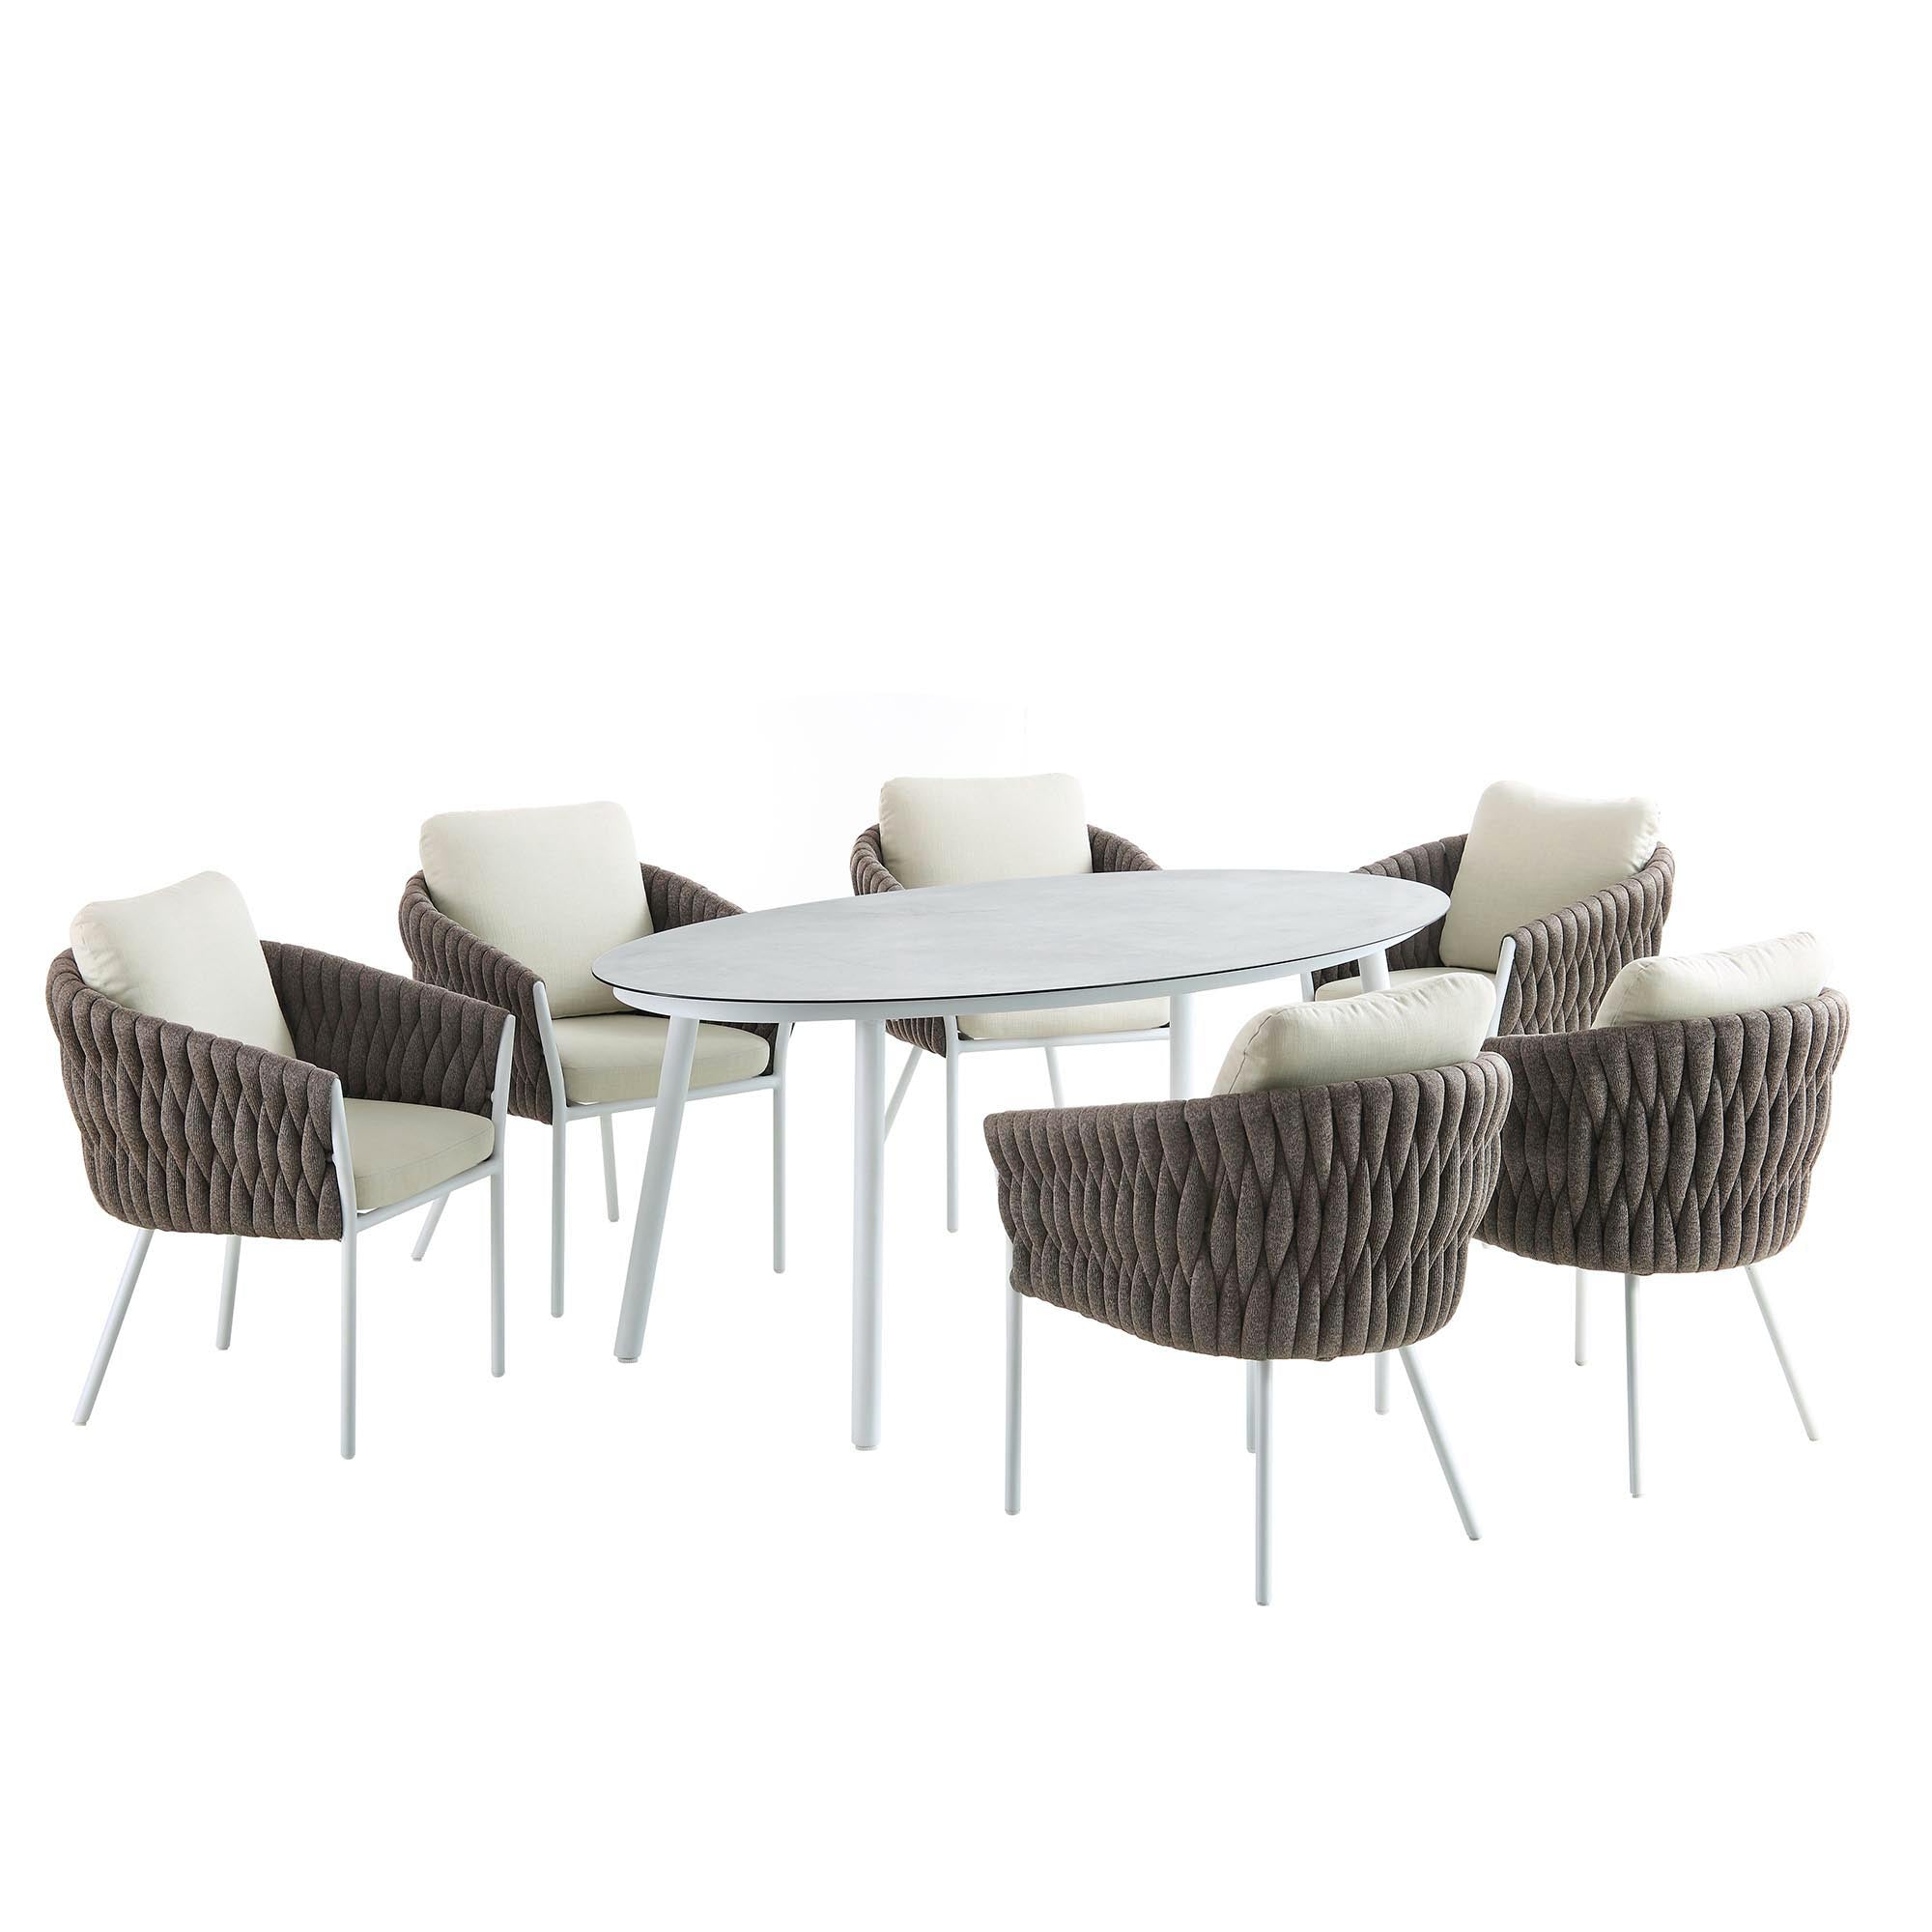 Montebello 6-Seater Outdoor Taupe Rope and Aluminium Oval Dining Set with White Ceramic Dining Table